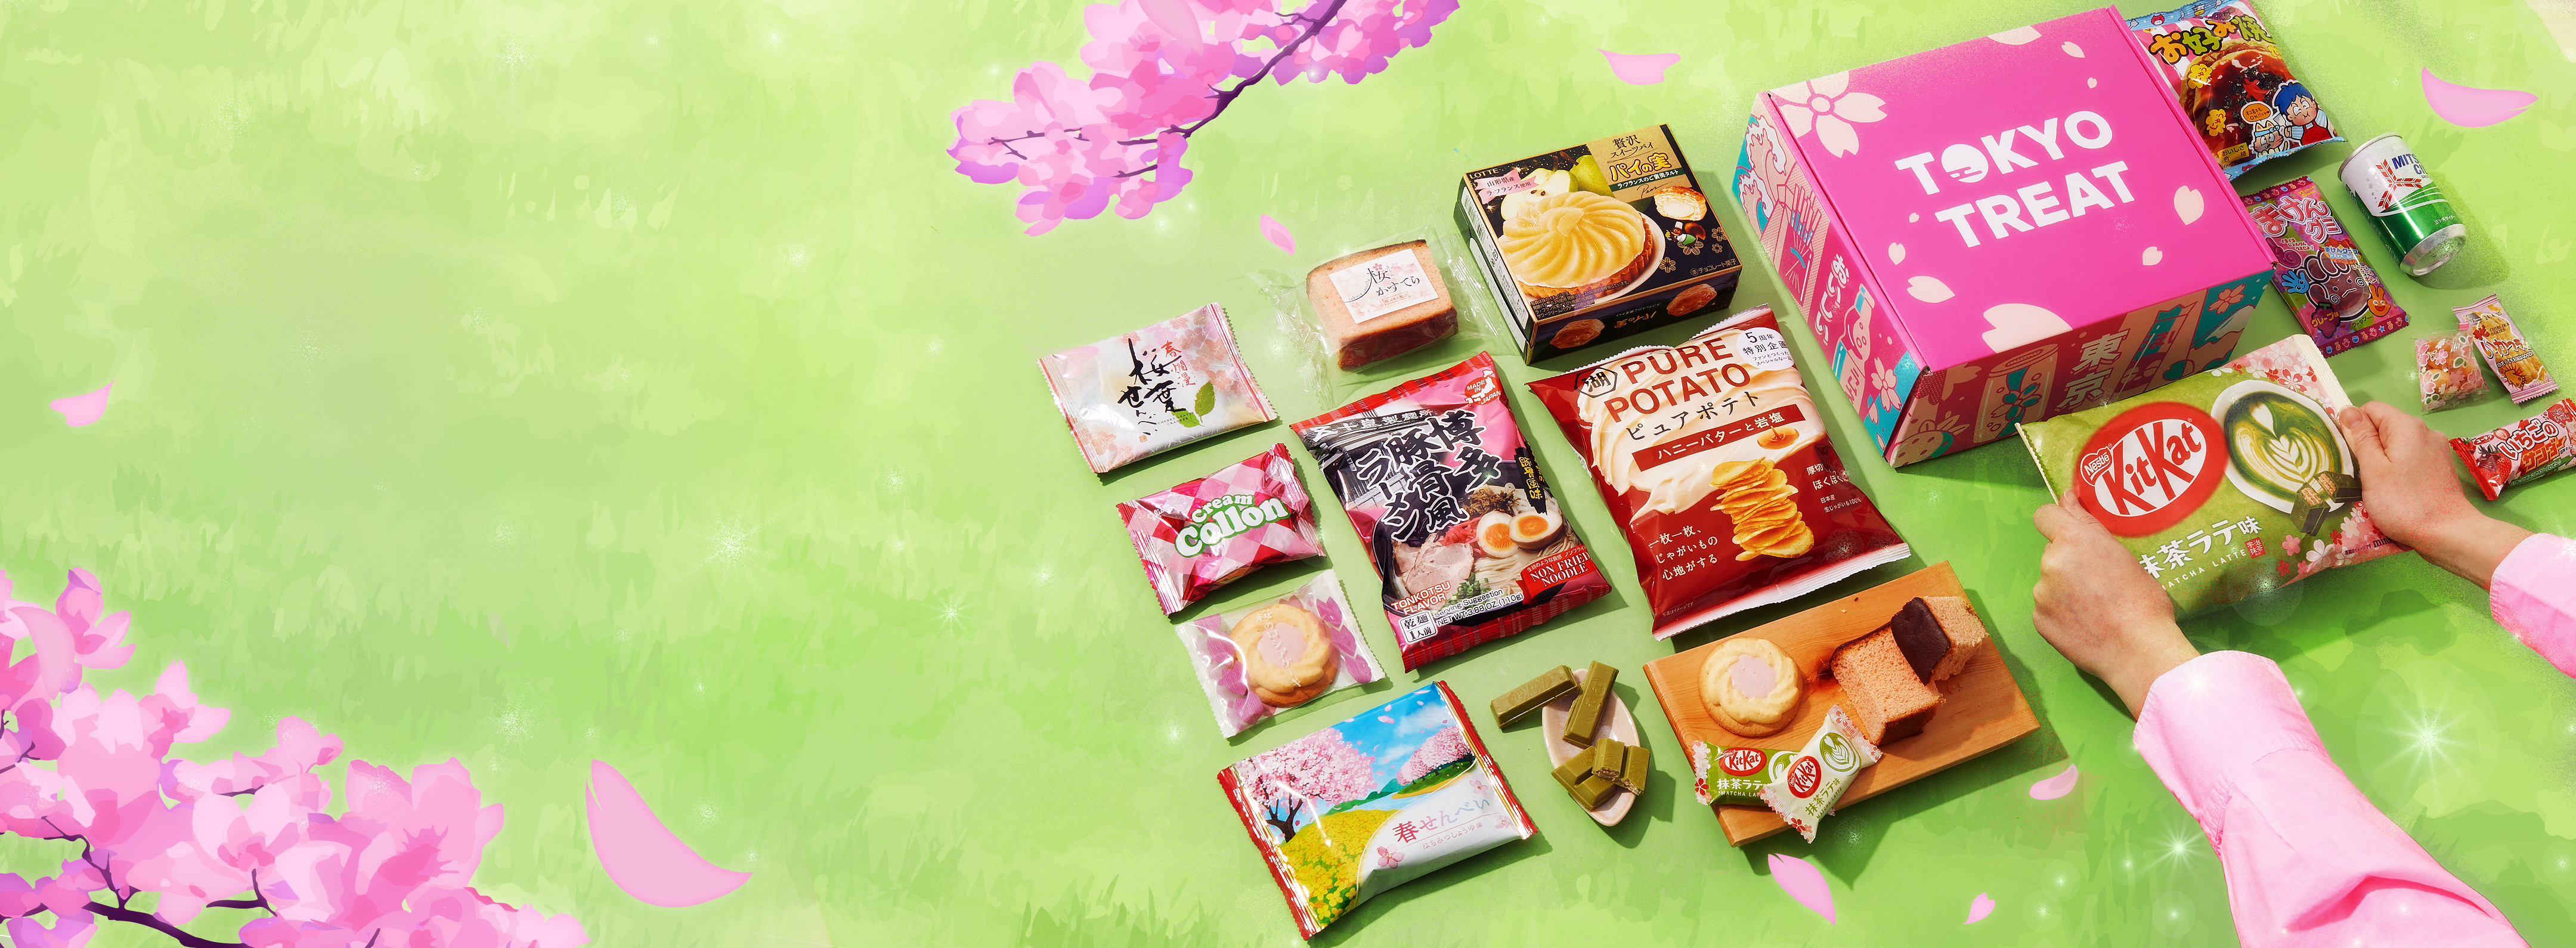 TokyoTreat box sits against a bright green grass background, surrounded by box items and cherry blossoms.